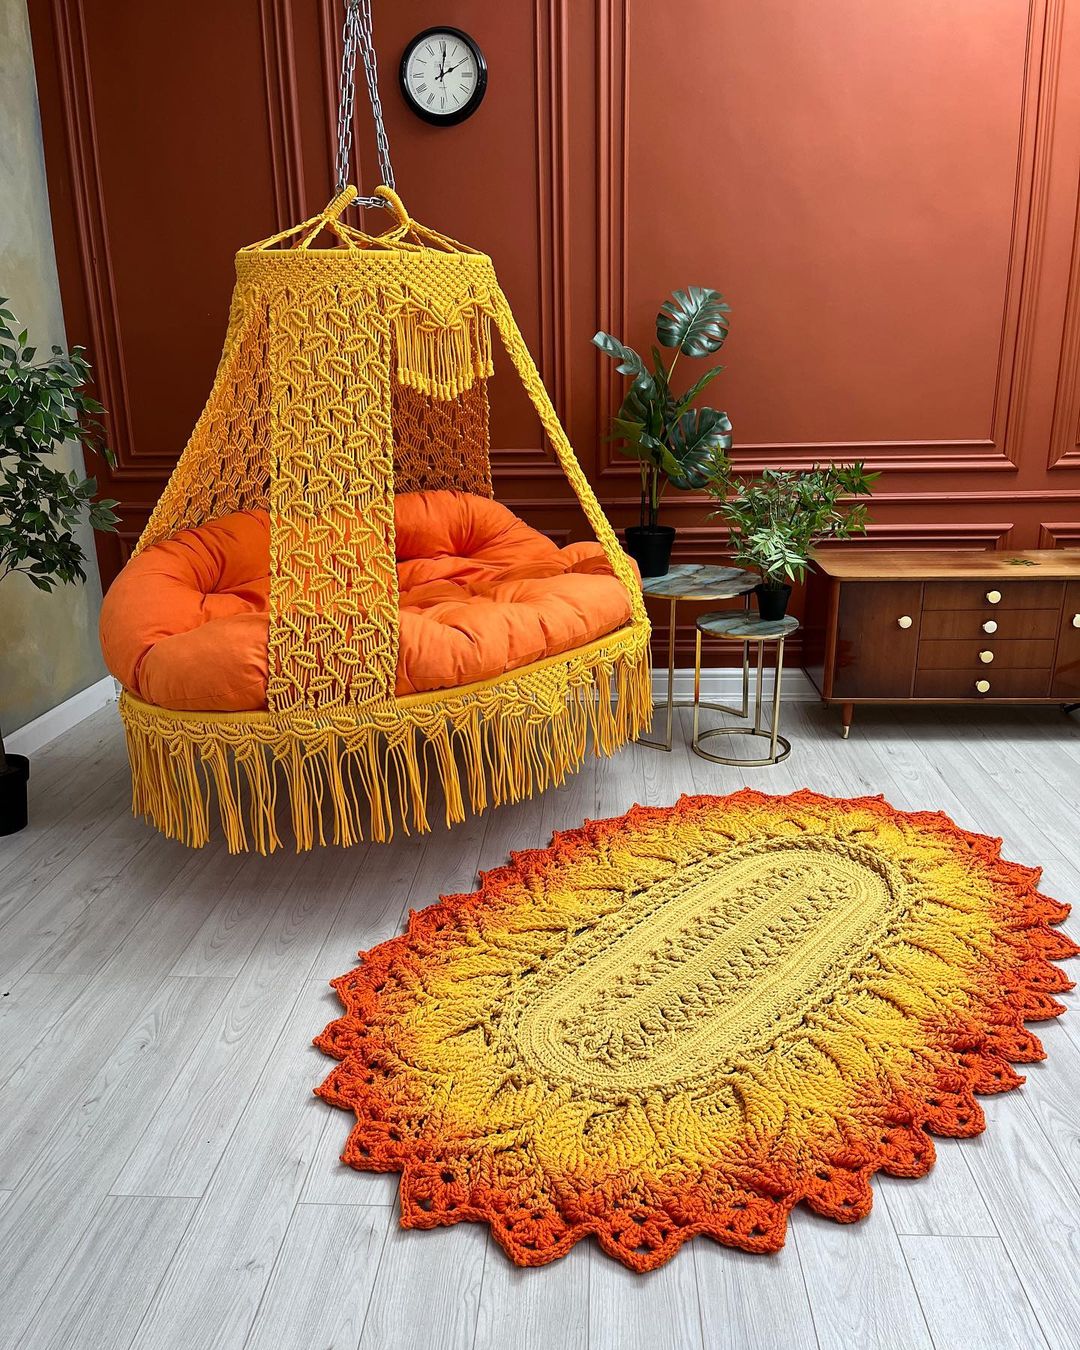 Handcraft Large Handmade Large Swing Sofa, Hanging Swing Chair Indoor and Outdoor Swing